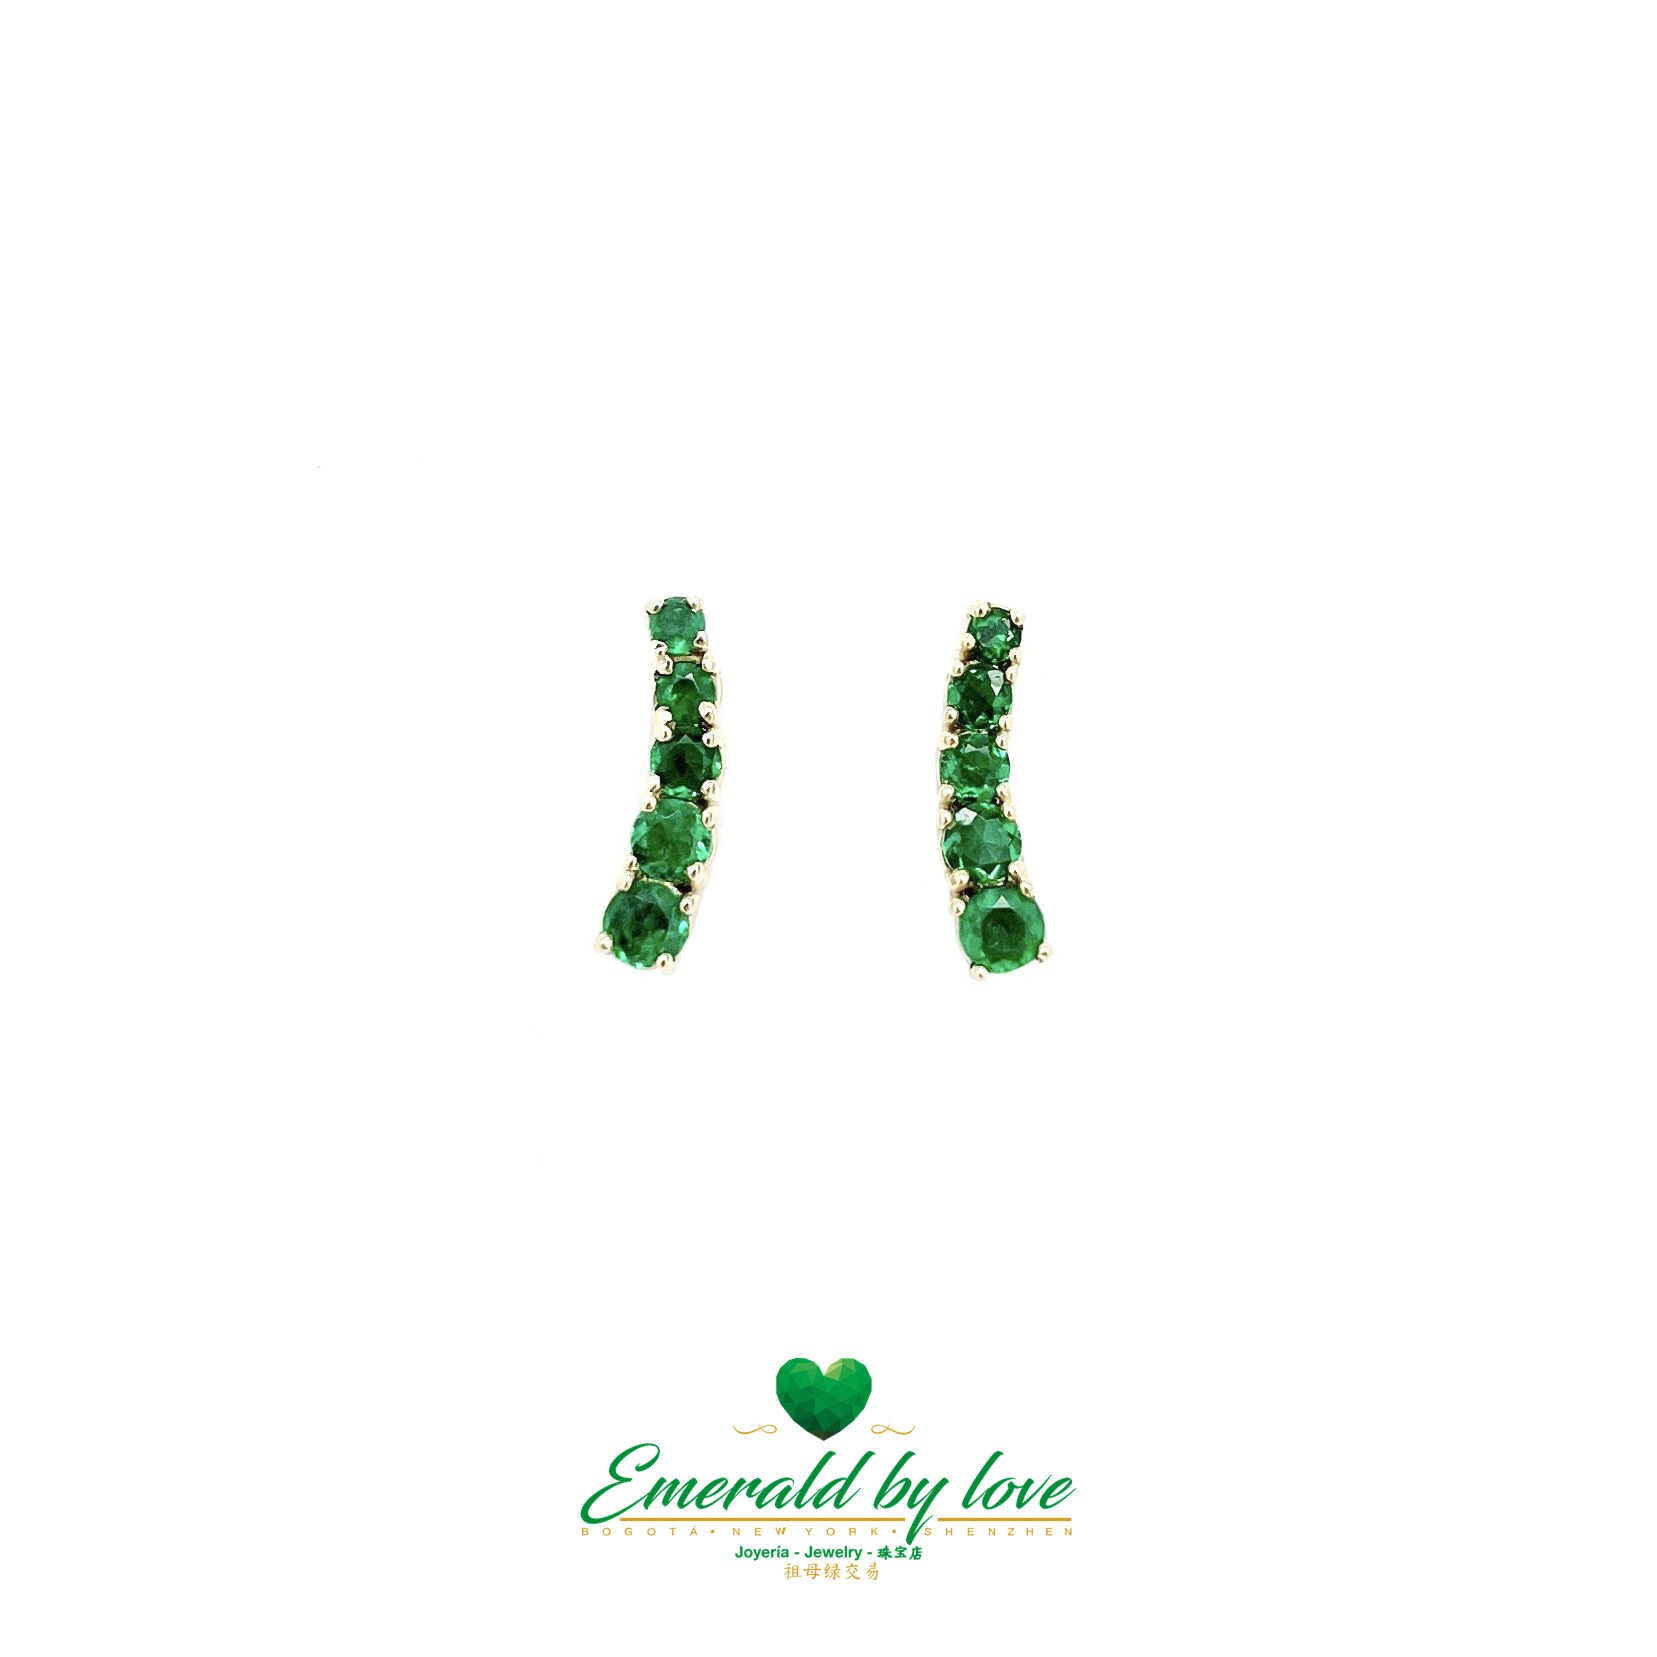 Contemporary Chic: 18k Yellow Gold Earrings with Round Colombian Emeralds